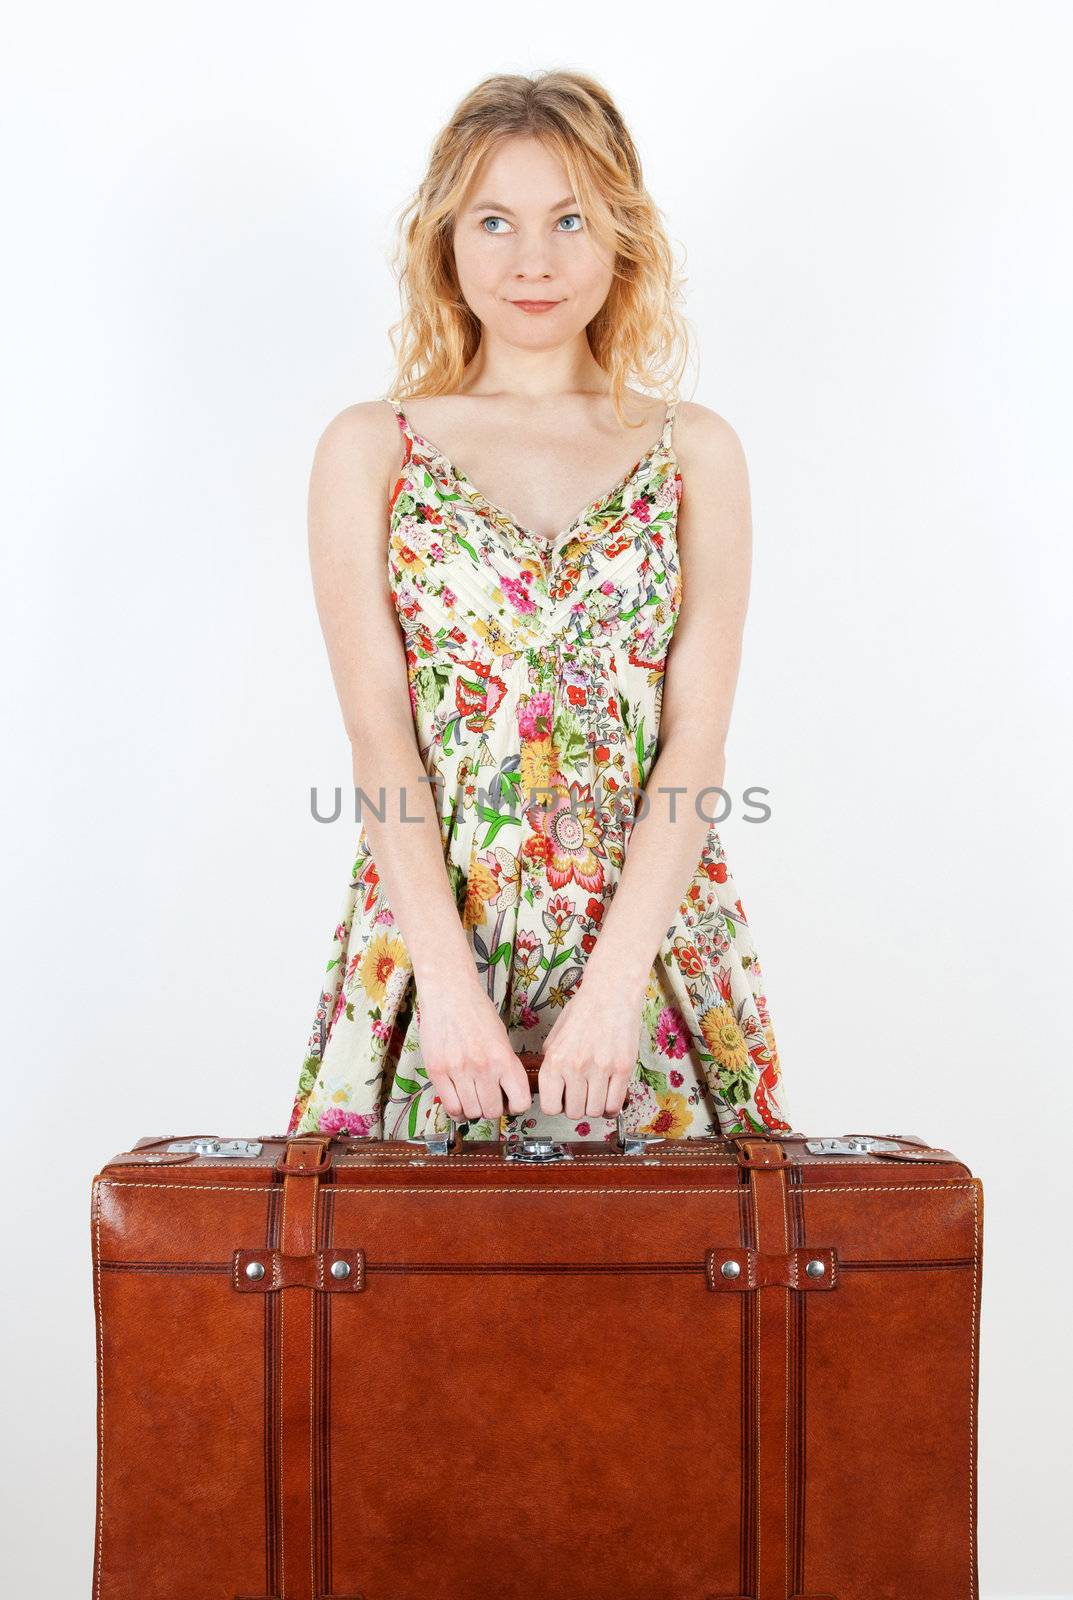 Girl with vintage suitcase anticipating travel by anikasalsera